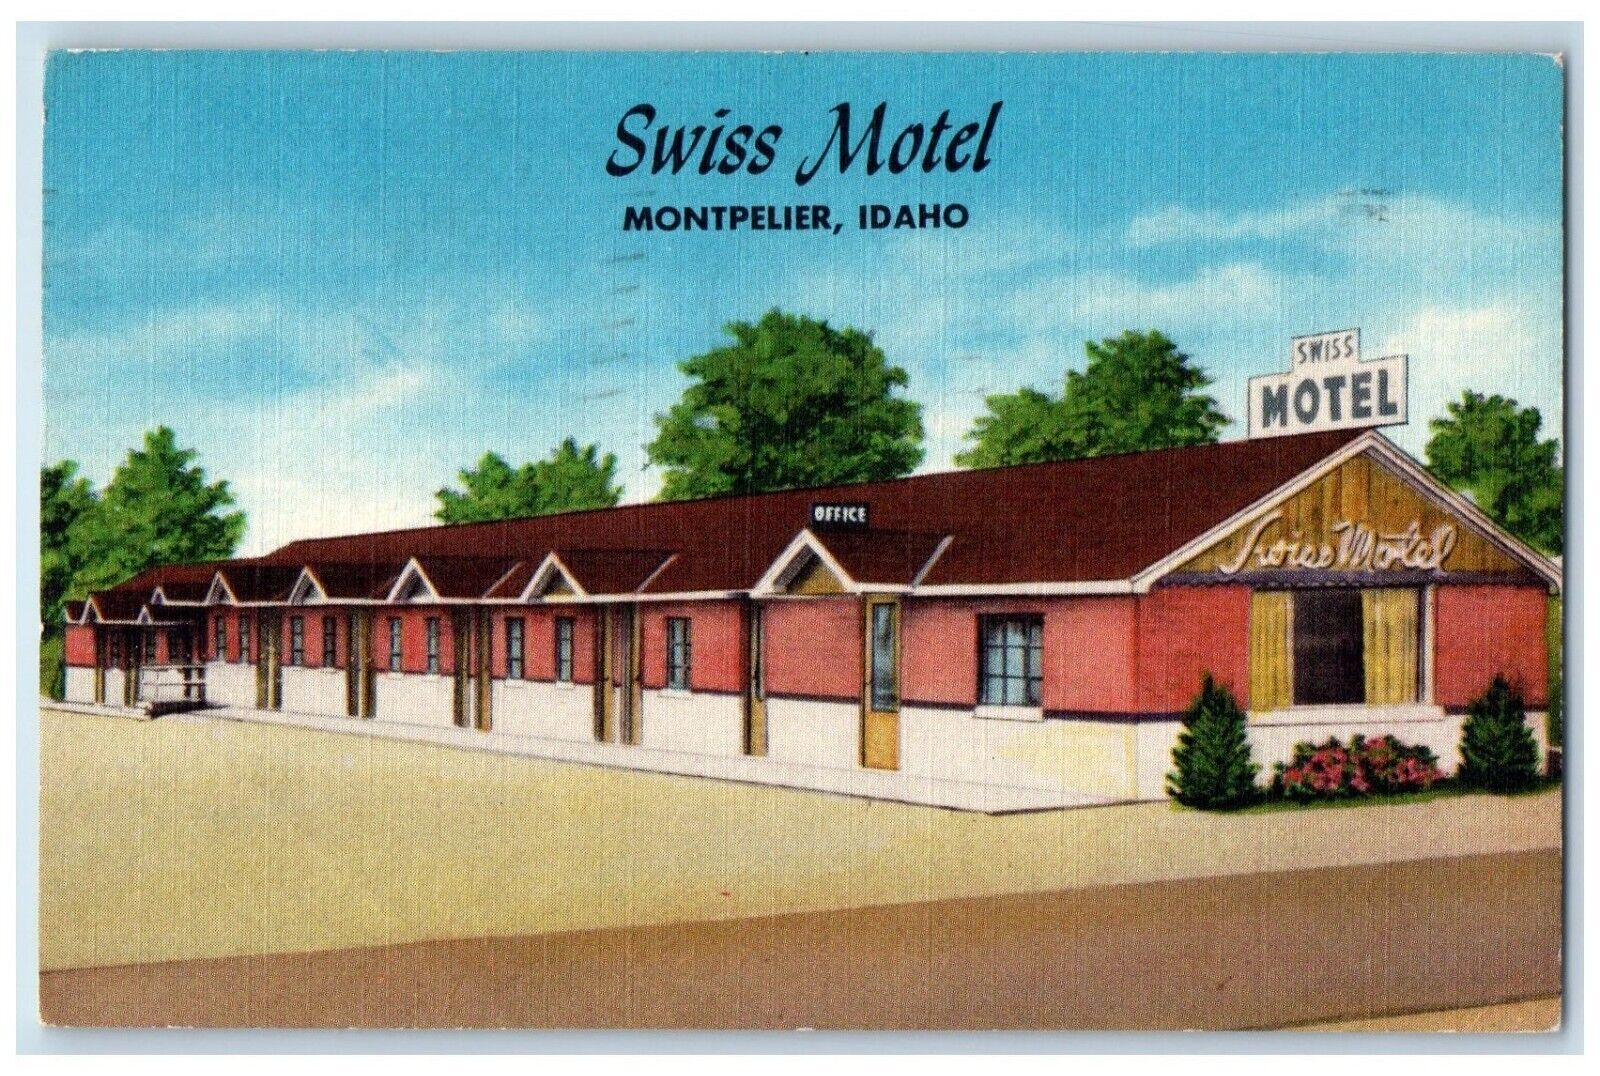 Montpelier Idaho Postcard Swiss Motel Building Exterior View 1956 Vintage Posted